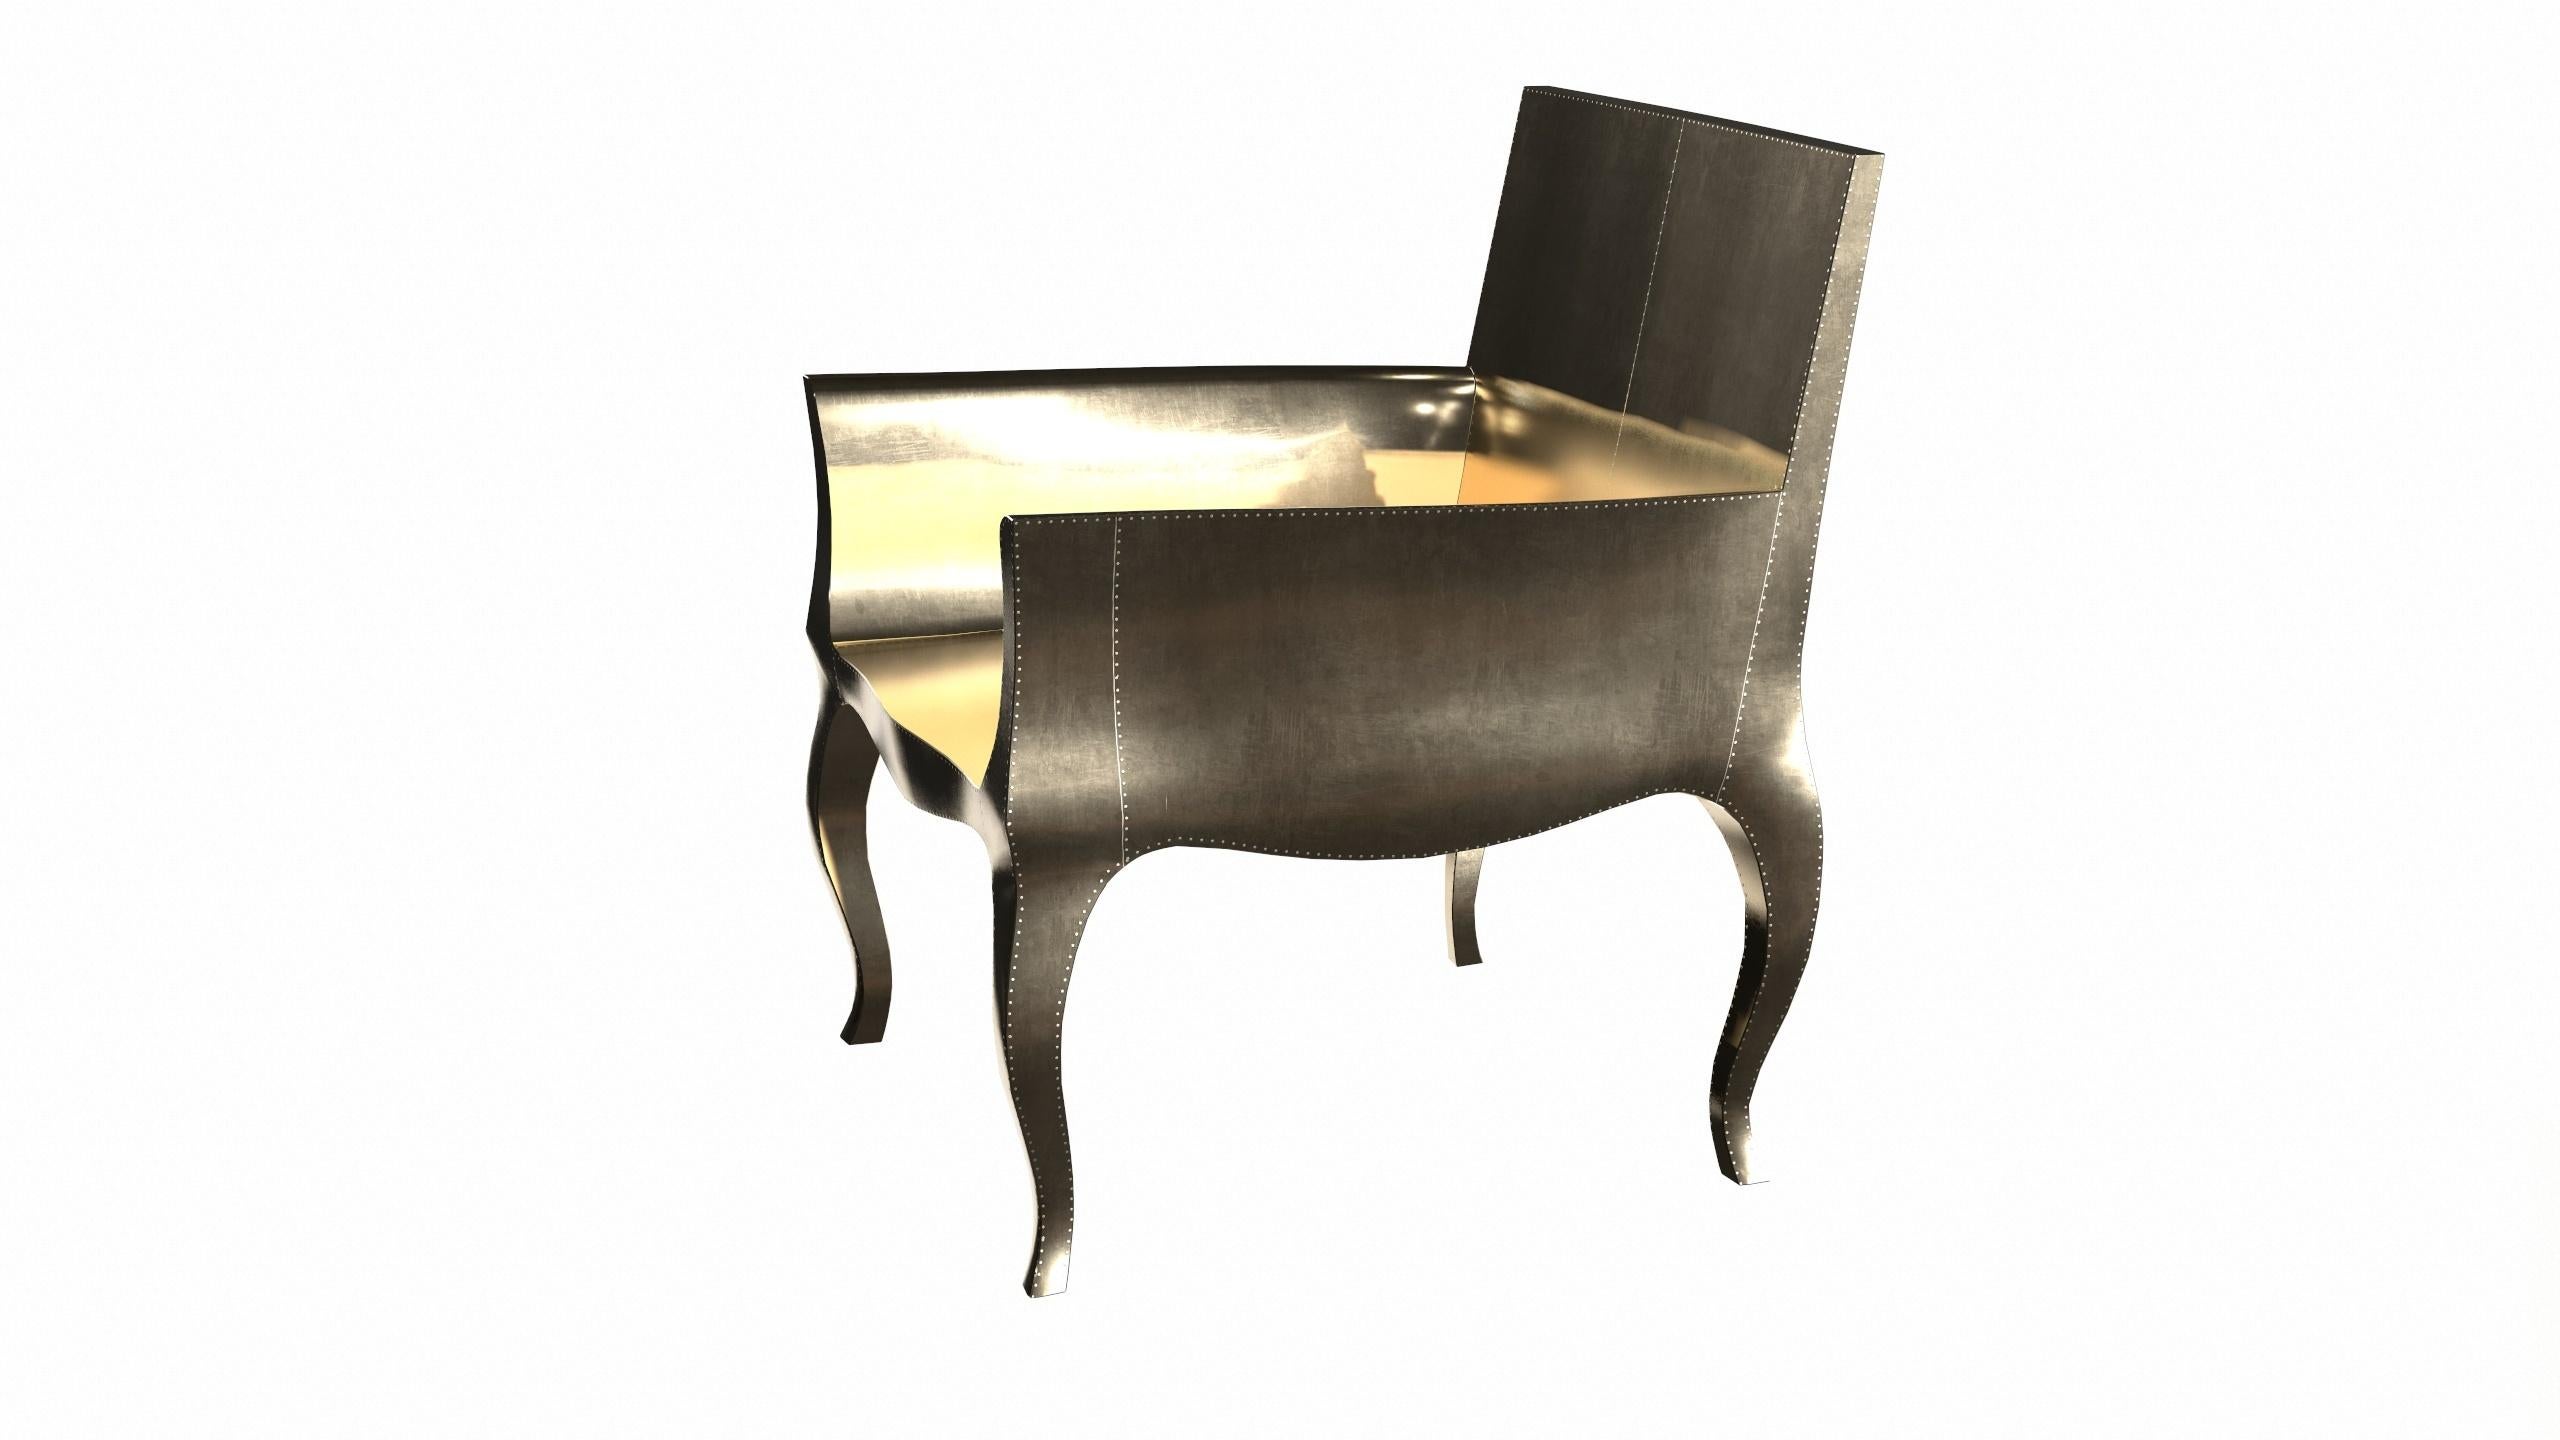 Hand-Carved Art Deco Office Chair in Smooth Brass by Paul Mathieu for S. Odegard For Sale